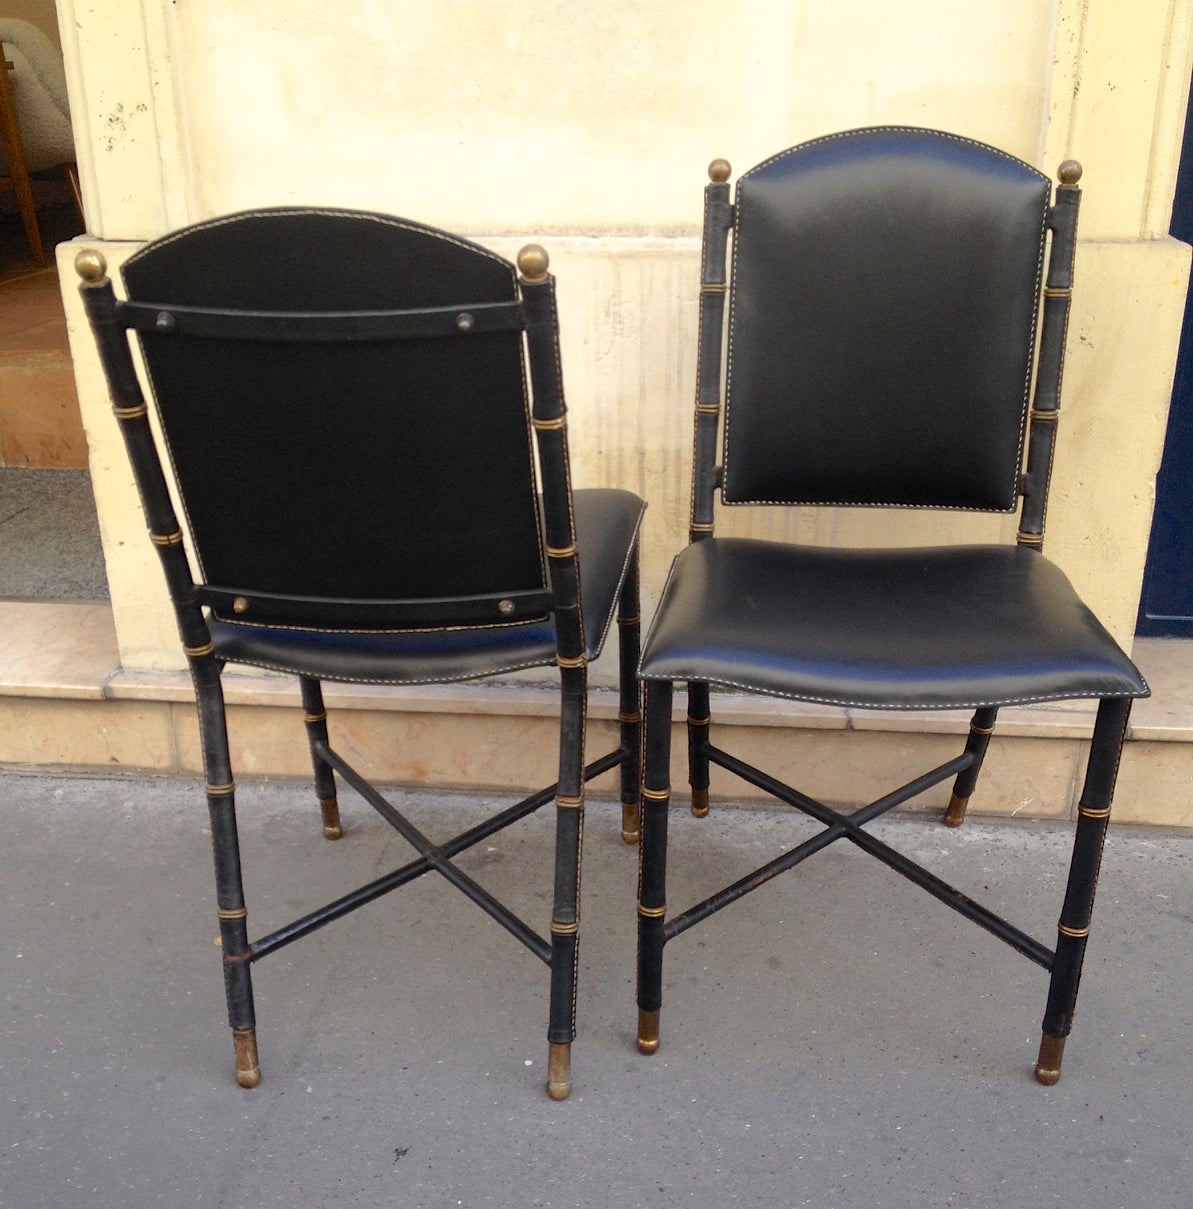 Jacques Adnet Rare Vintage Pair of Hand-Stitched Black Leather Chairs For Sale 4